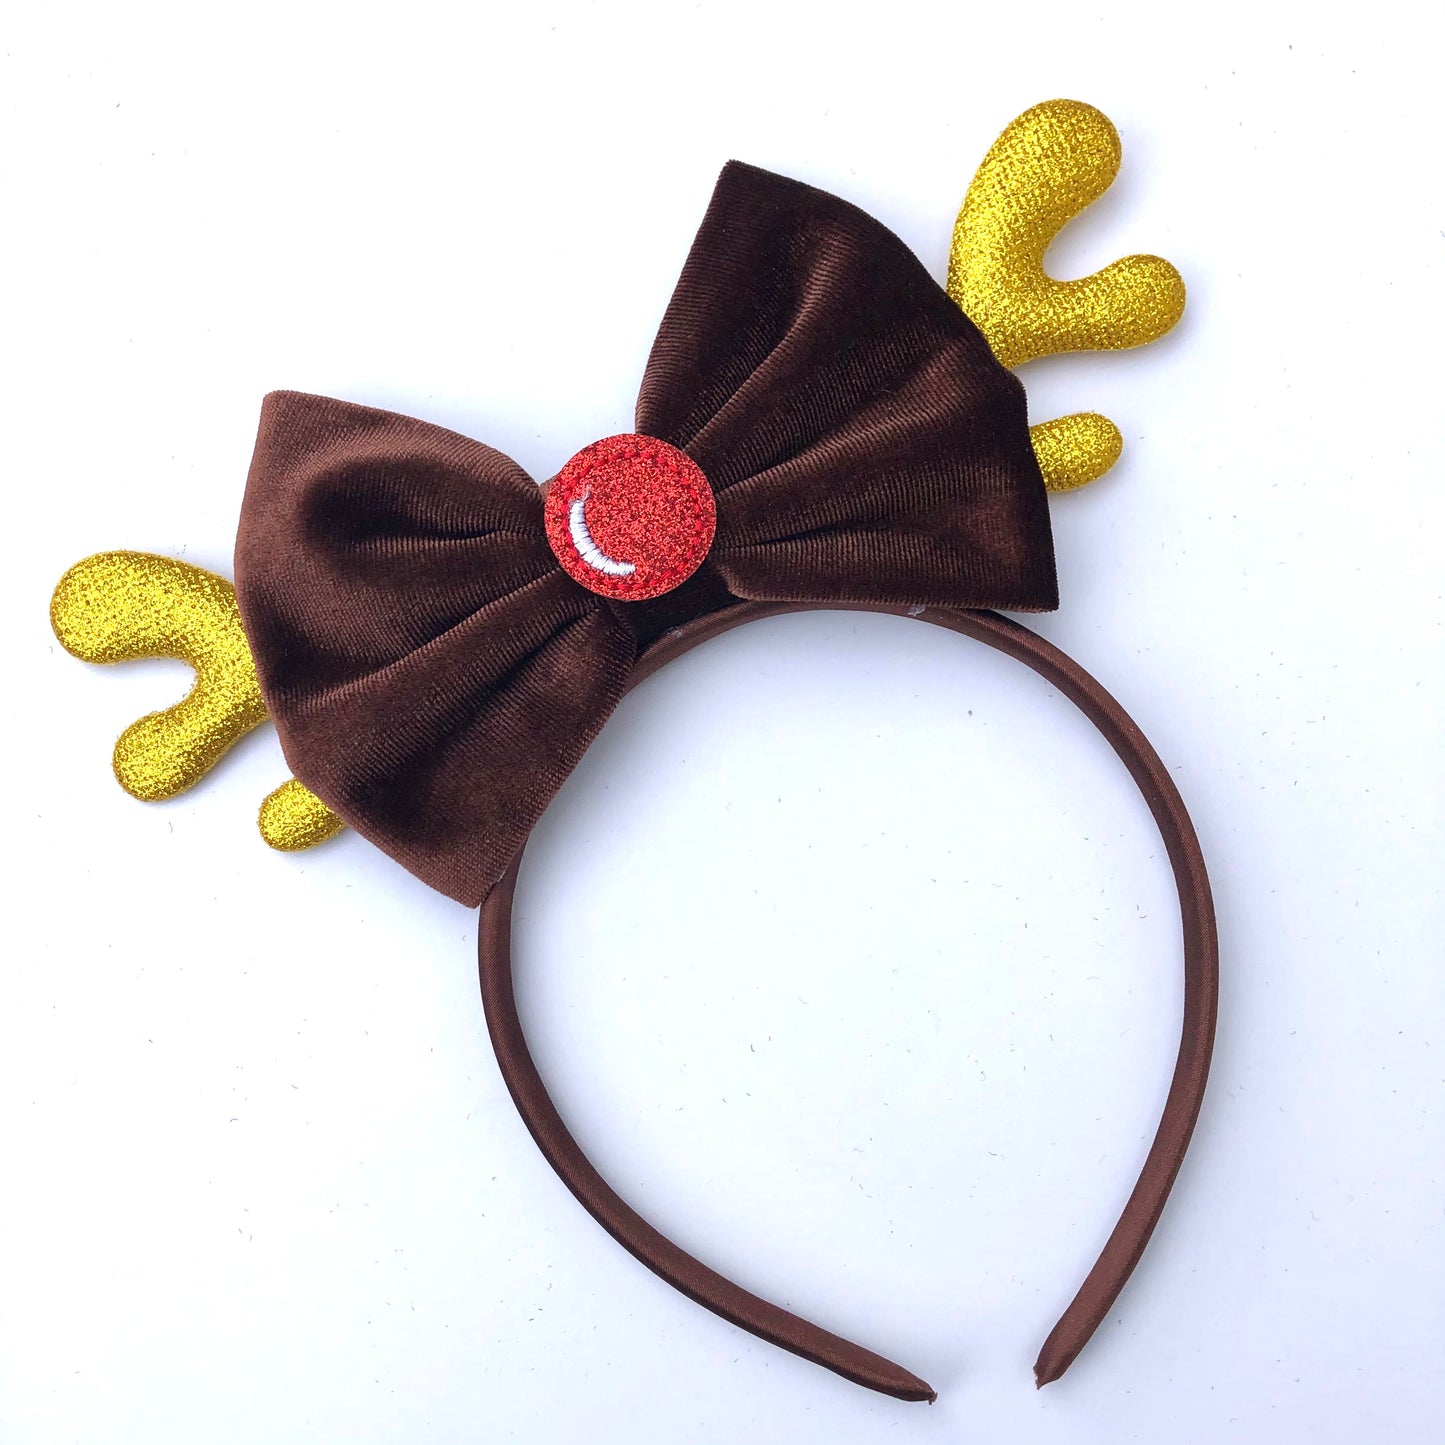 Reindeer headband with gold antlers and a red shiny nose